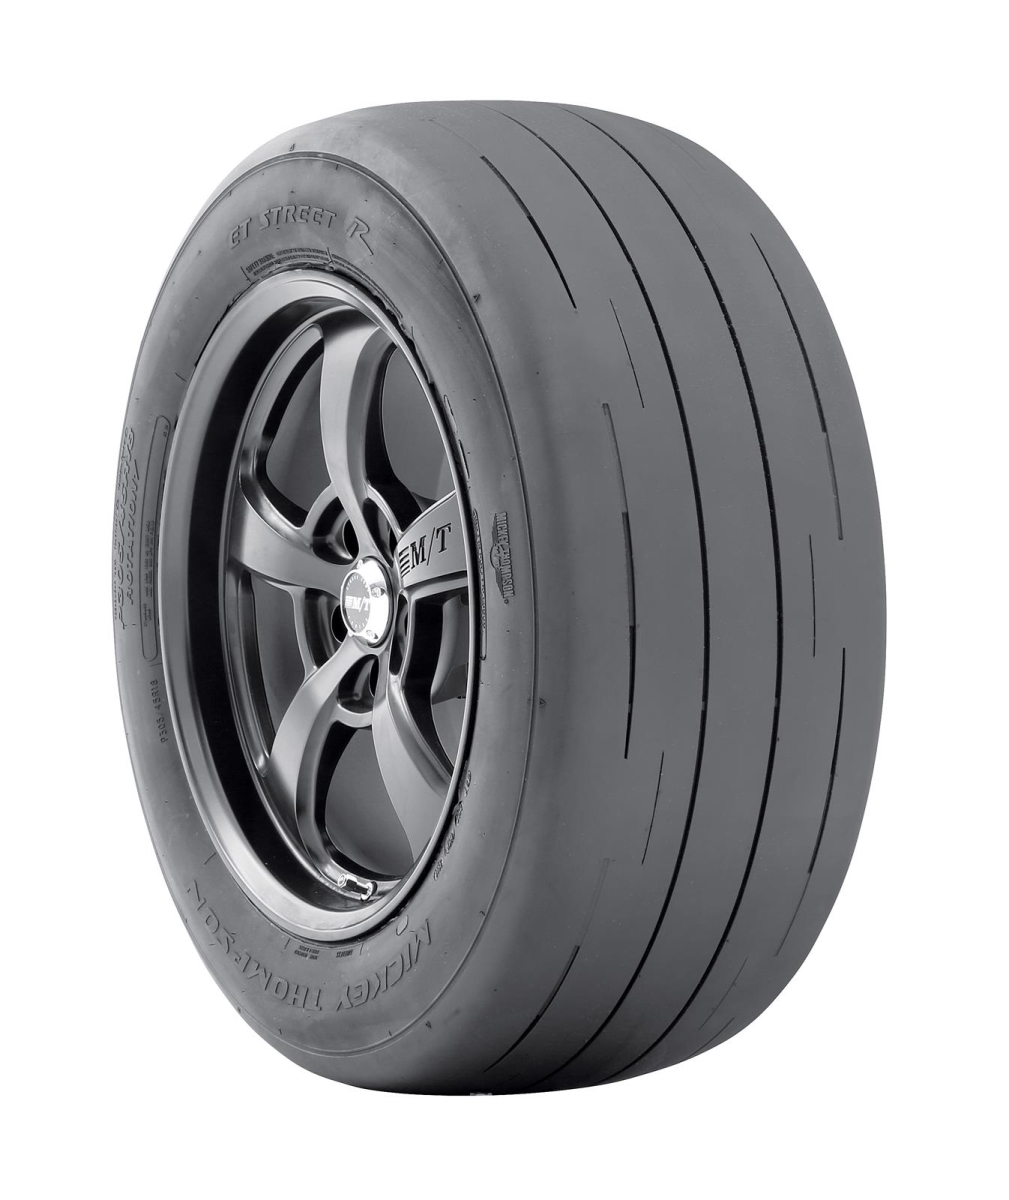 Picture of M.T. Drag 31236 P315-60R15 Mickey Thompson ET Street R Radial Tires